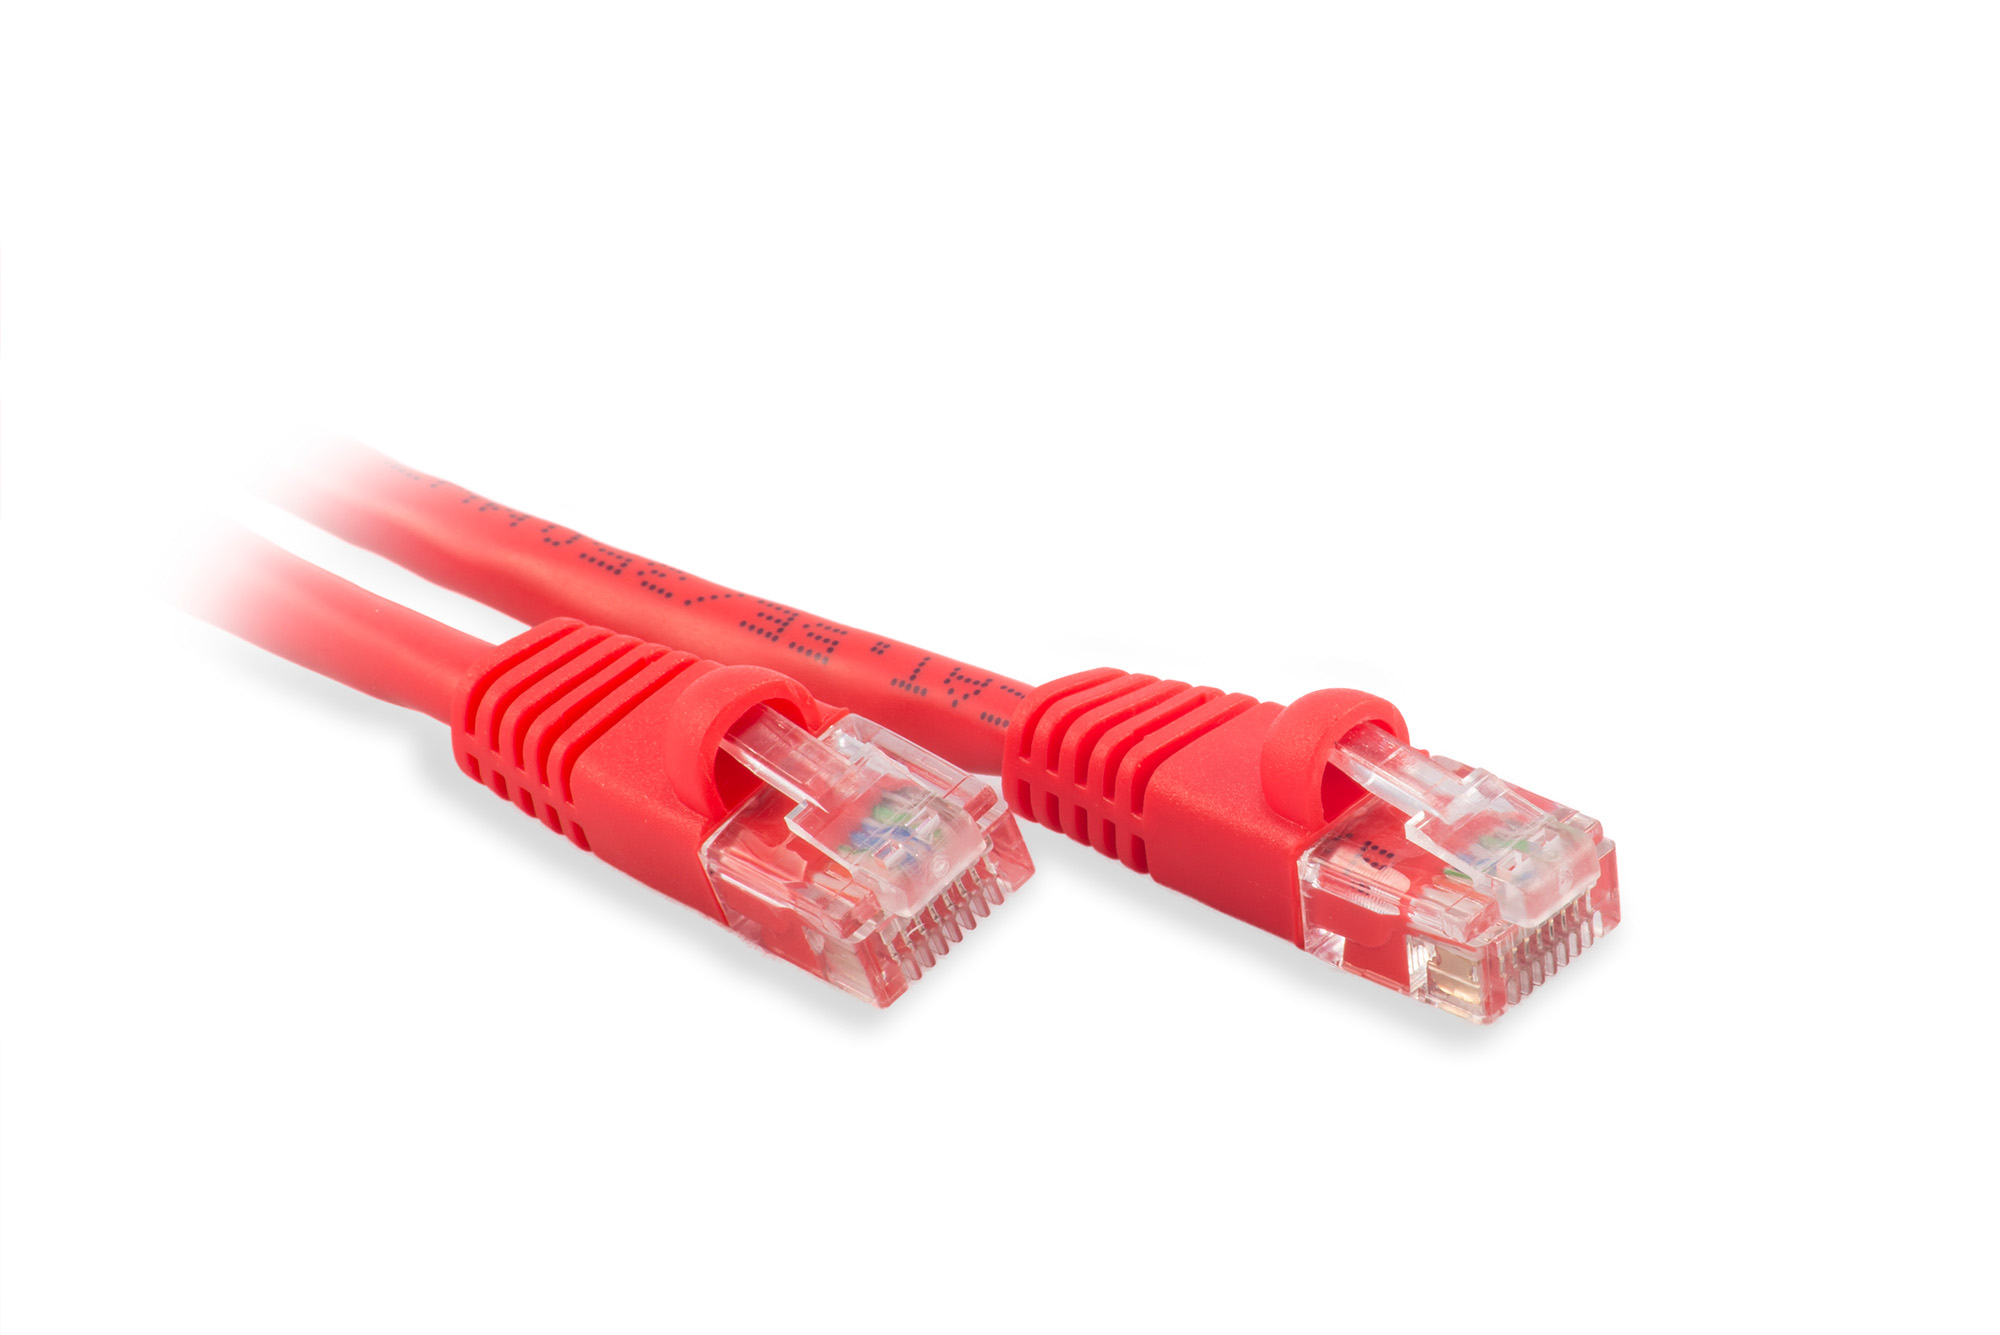 35ft Cat6 Ethernet Patch Cable - Red Color - Snagless Boot